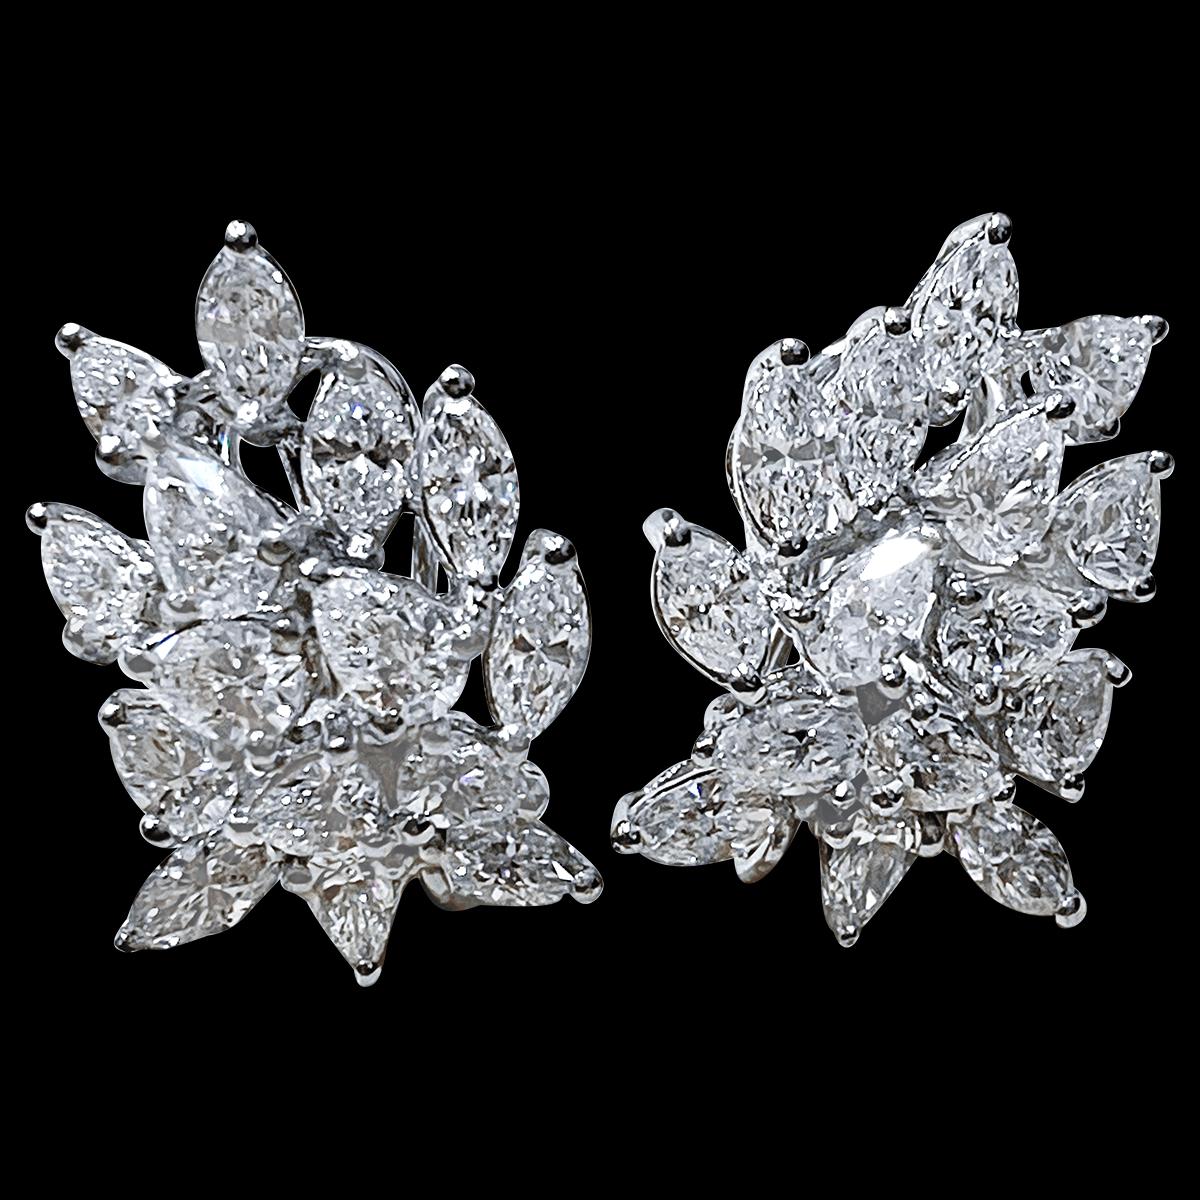 20 Carat Marquise and Pear Shape Diamond Cluster Stud Earrings in Platinum 1960' 1